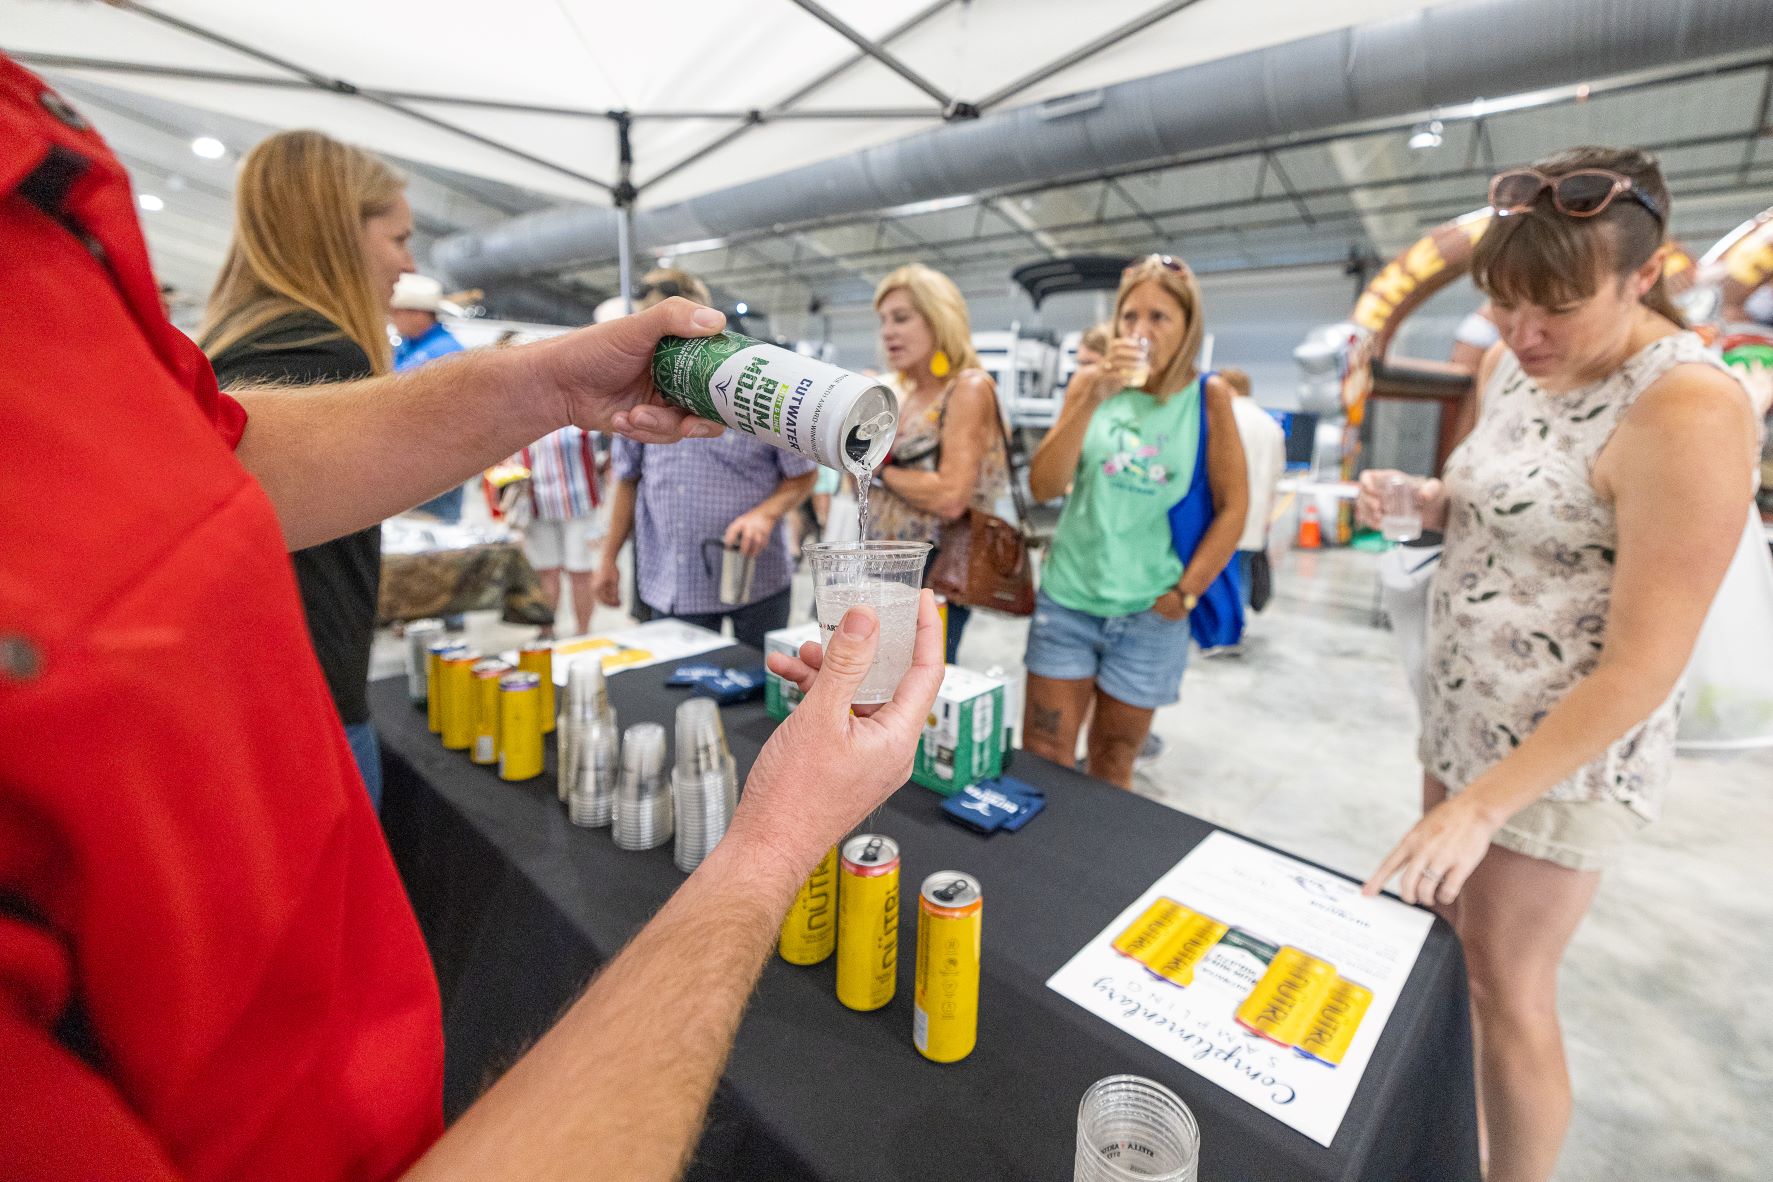 Man pours Cutwater Seltzer for women sampling beverages at event. Additional adult beverages are on table available for sampling. 